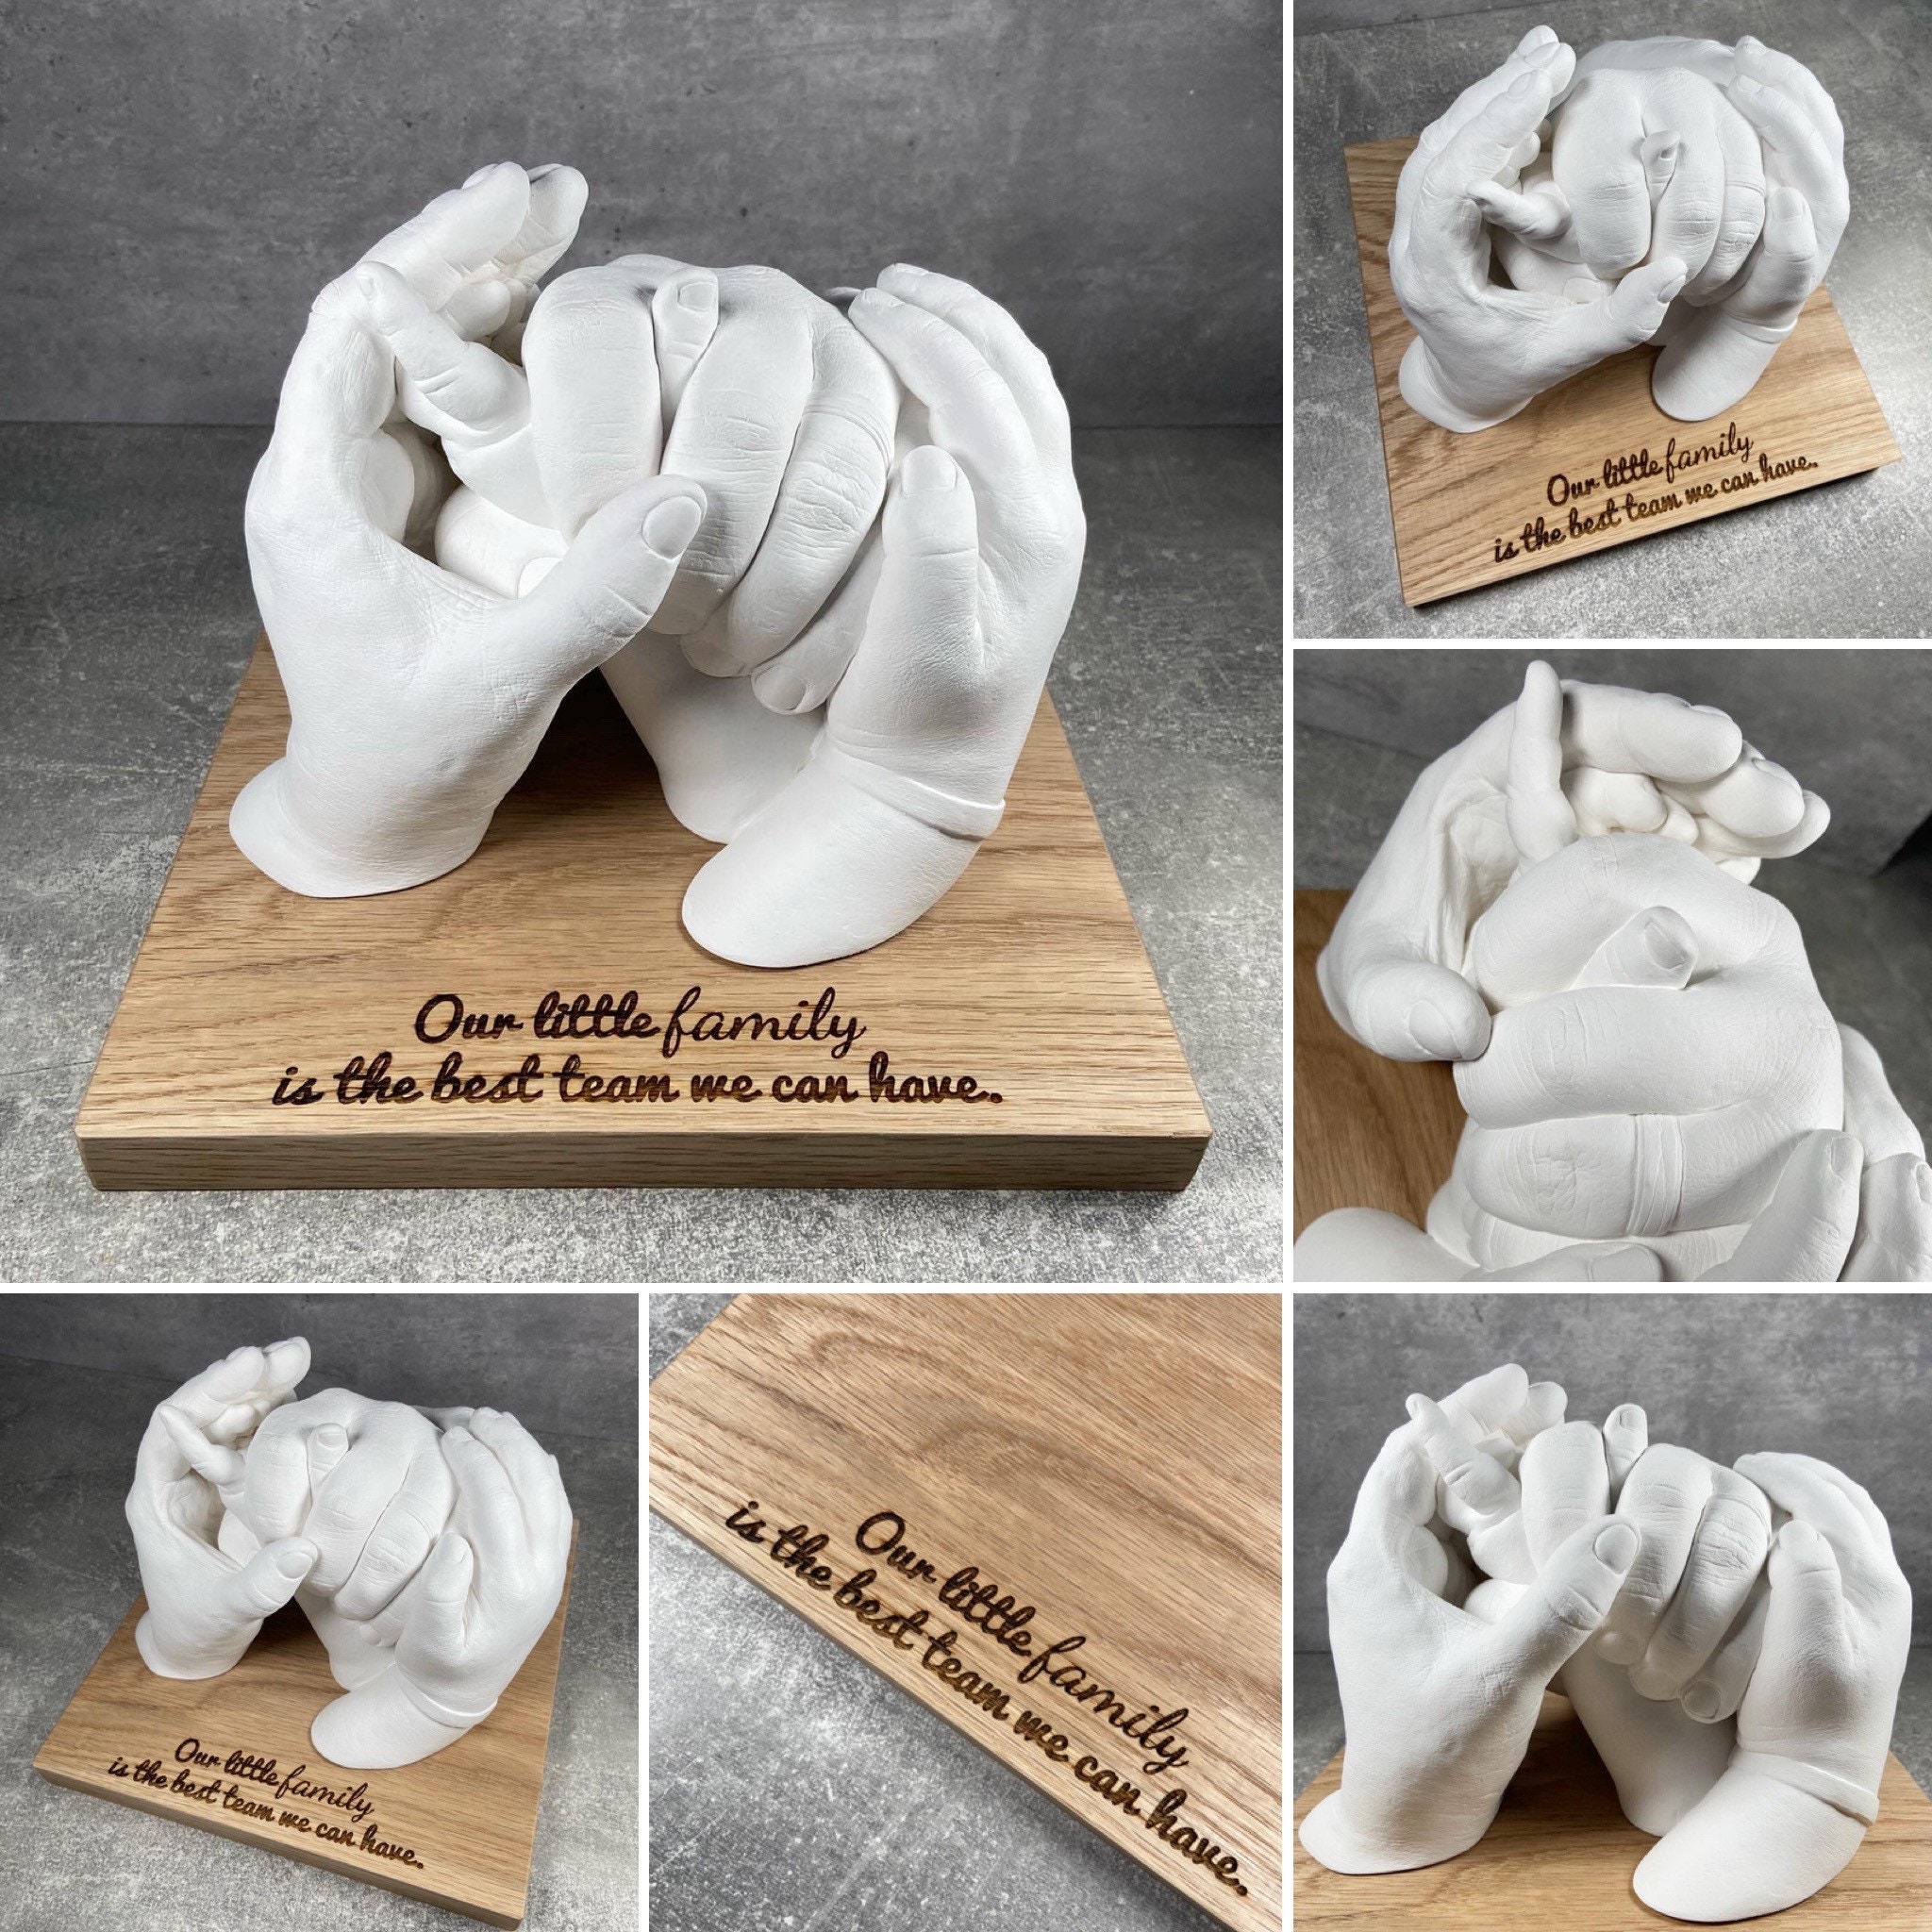 Hand Casting Kit for Couples or Family | Mounting Plaque Included | DIY  Plaster Hand Mold Keepsake Sculpture Kit Gifts for Her, Kids, Weddings